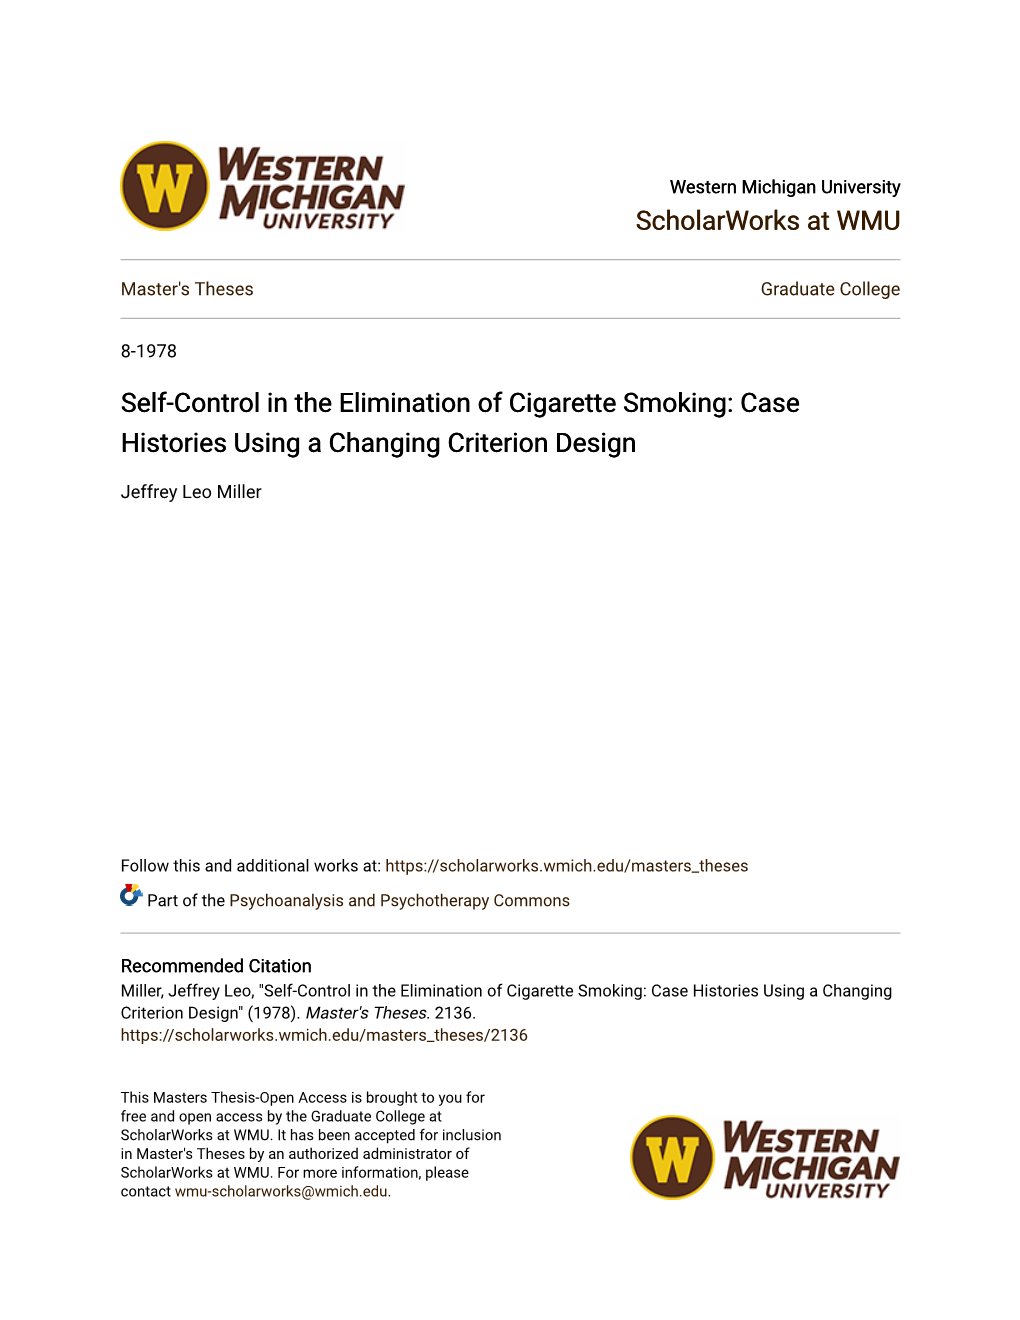 Self-Control in the Elimination of Cigarette Smoking: Case Histories Using a Changing Criterion Design